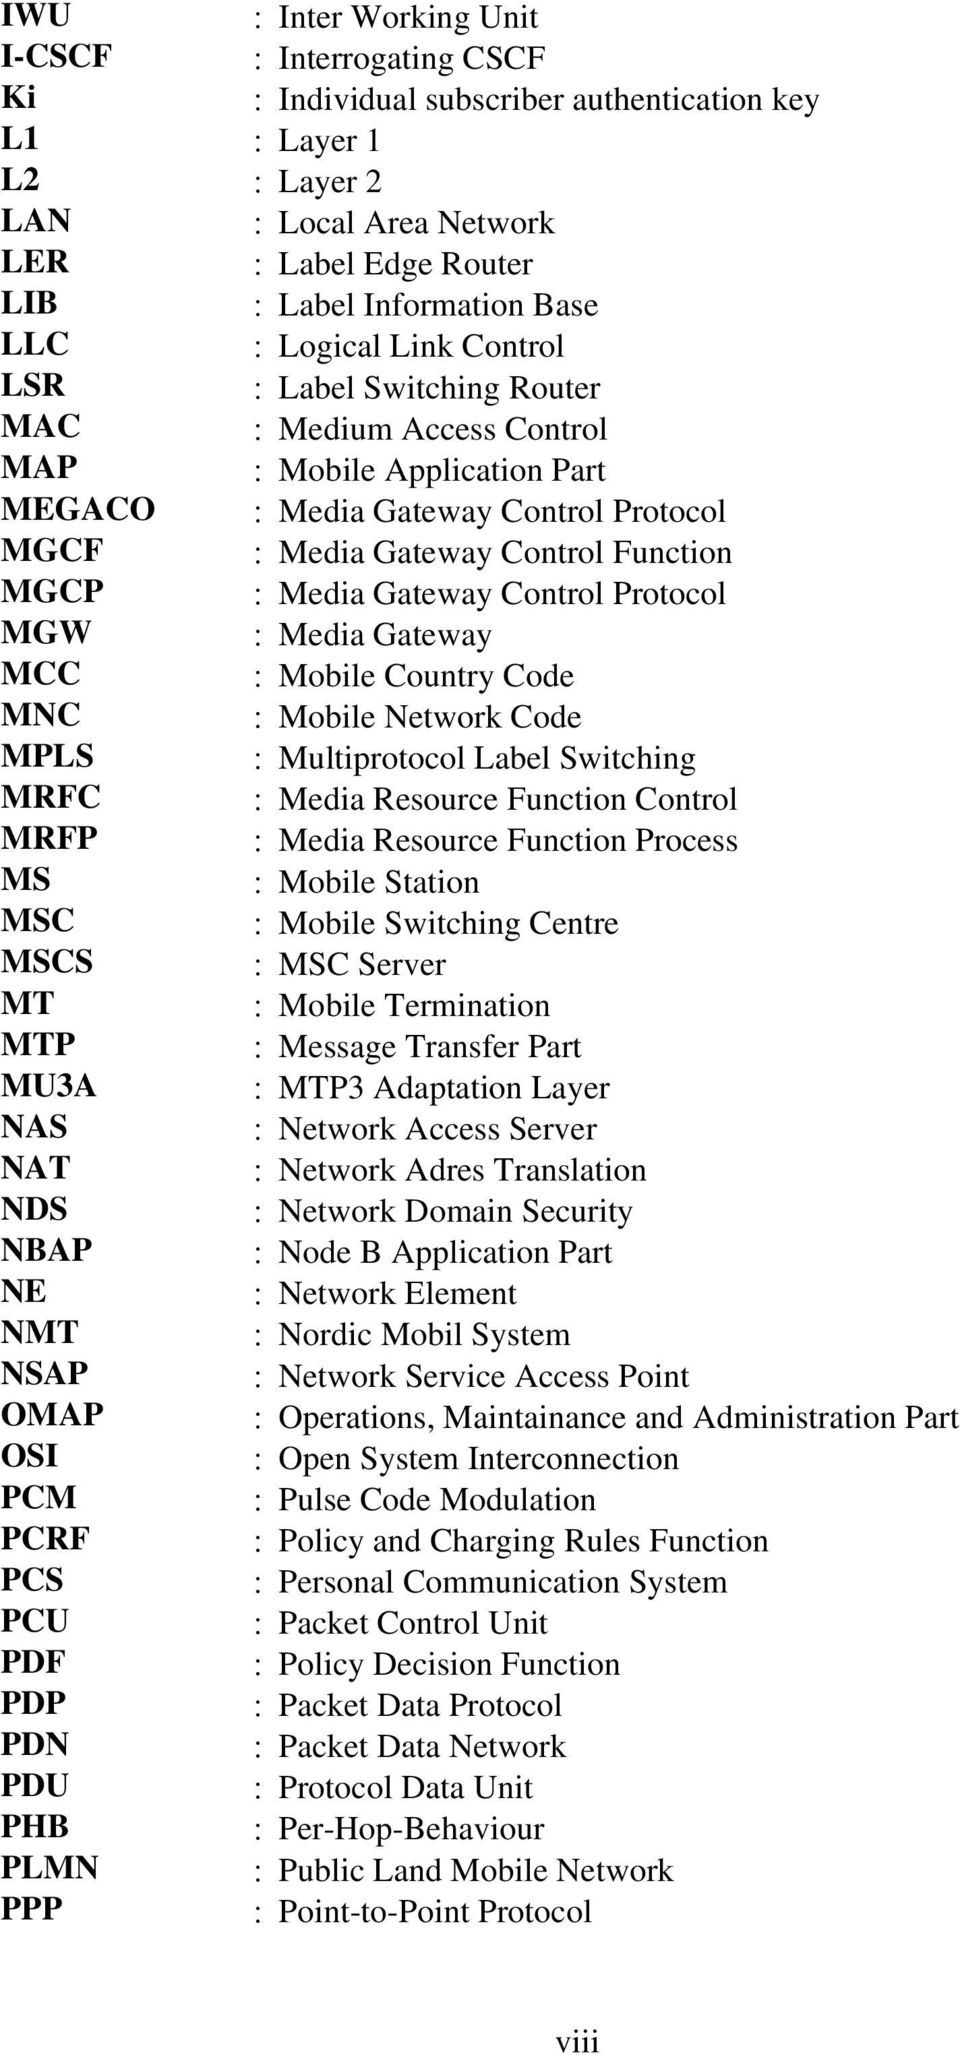 MGCP : Media Gateway Control Protocol MGW : Media Gateway MCC : Mobile Country Code MNC : Mobile Network Code MPLS : Multiprotocol Label Switching MRFC : Media Resource Function Control MRFP : Media